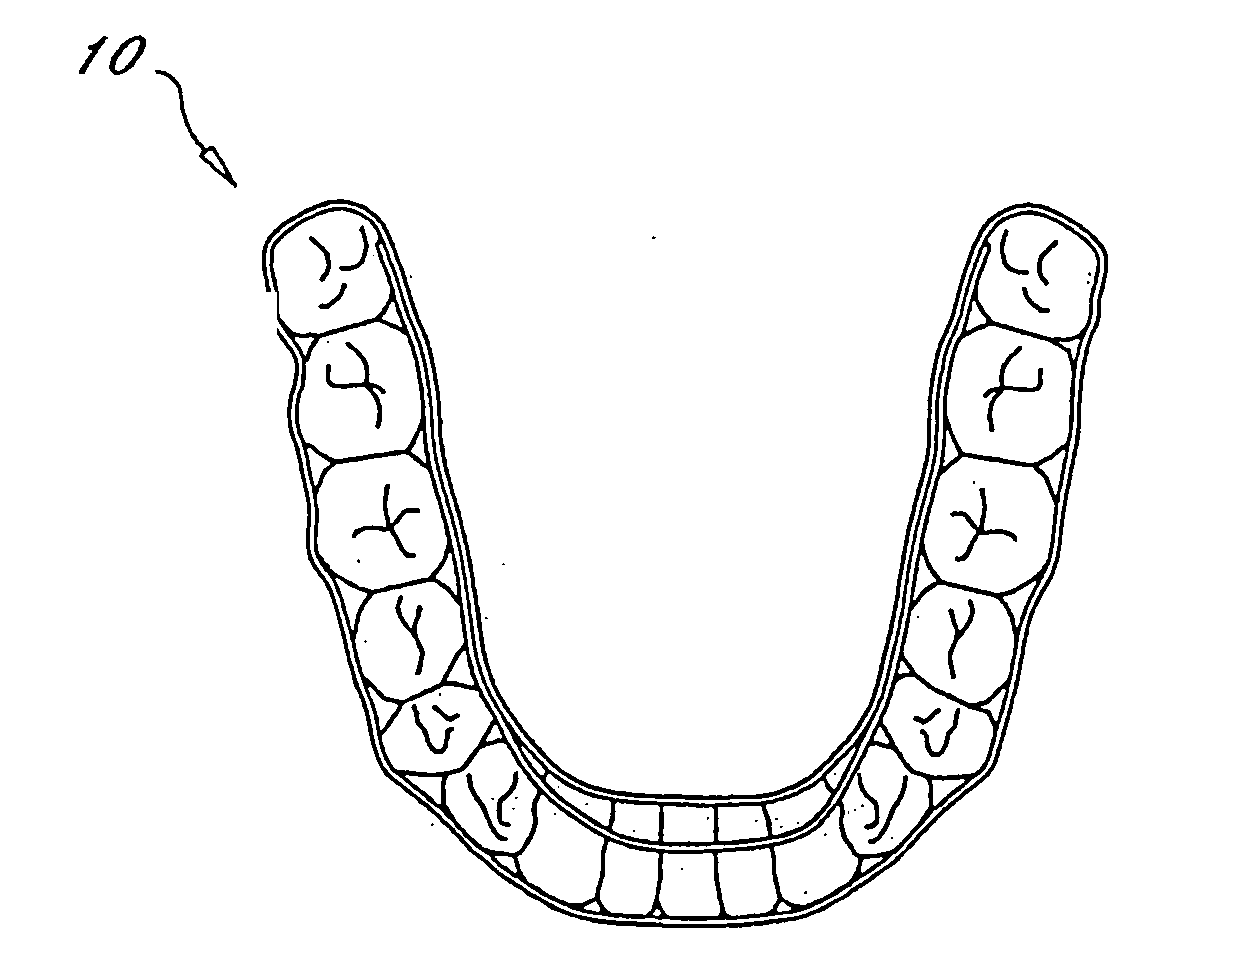 Orthodontic appliance with embedded wire for moving teeth